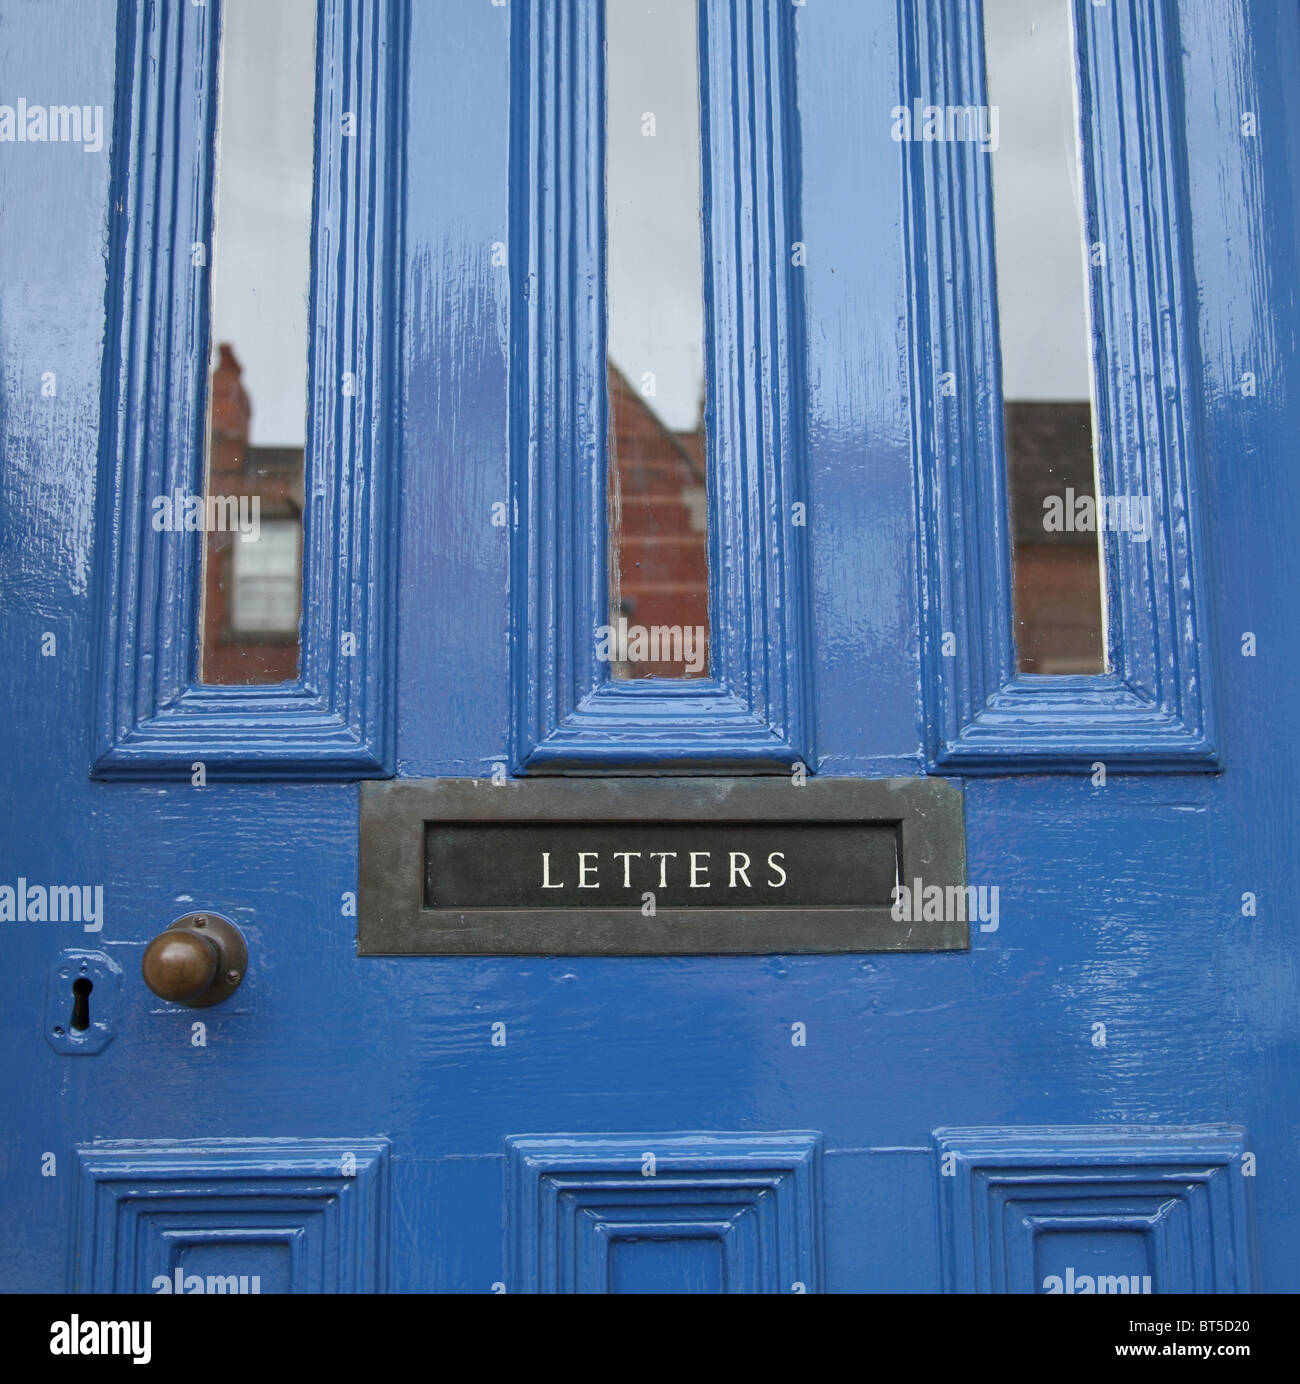 A blue painted door with letterbox. Stock Photo